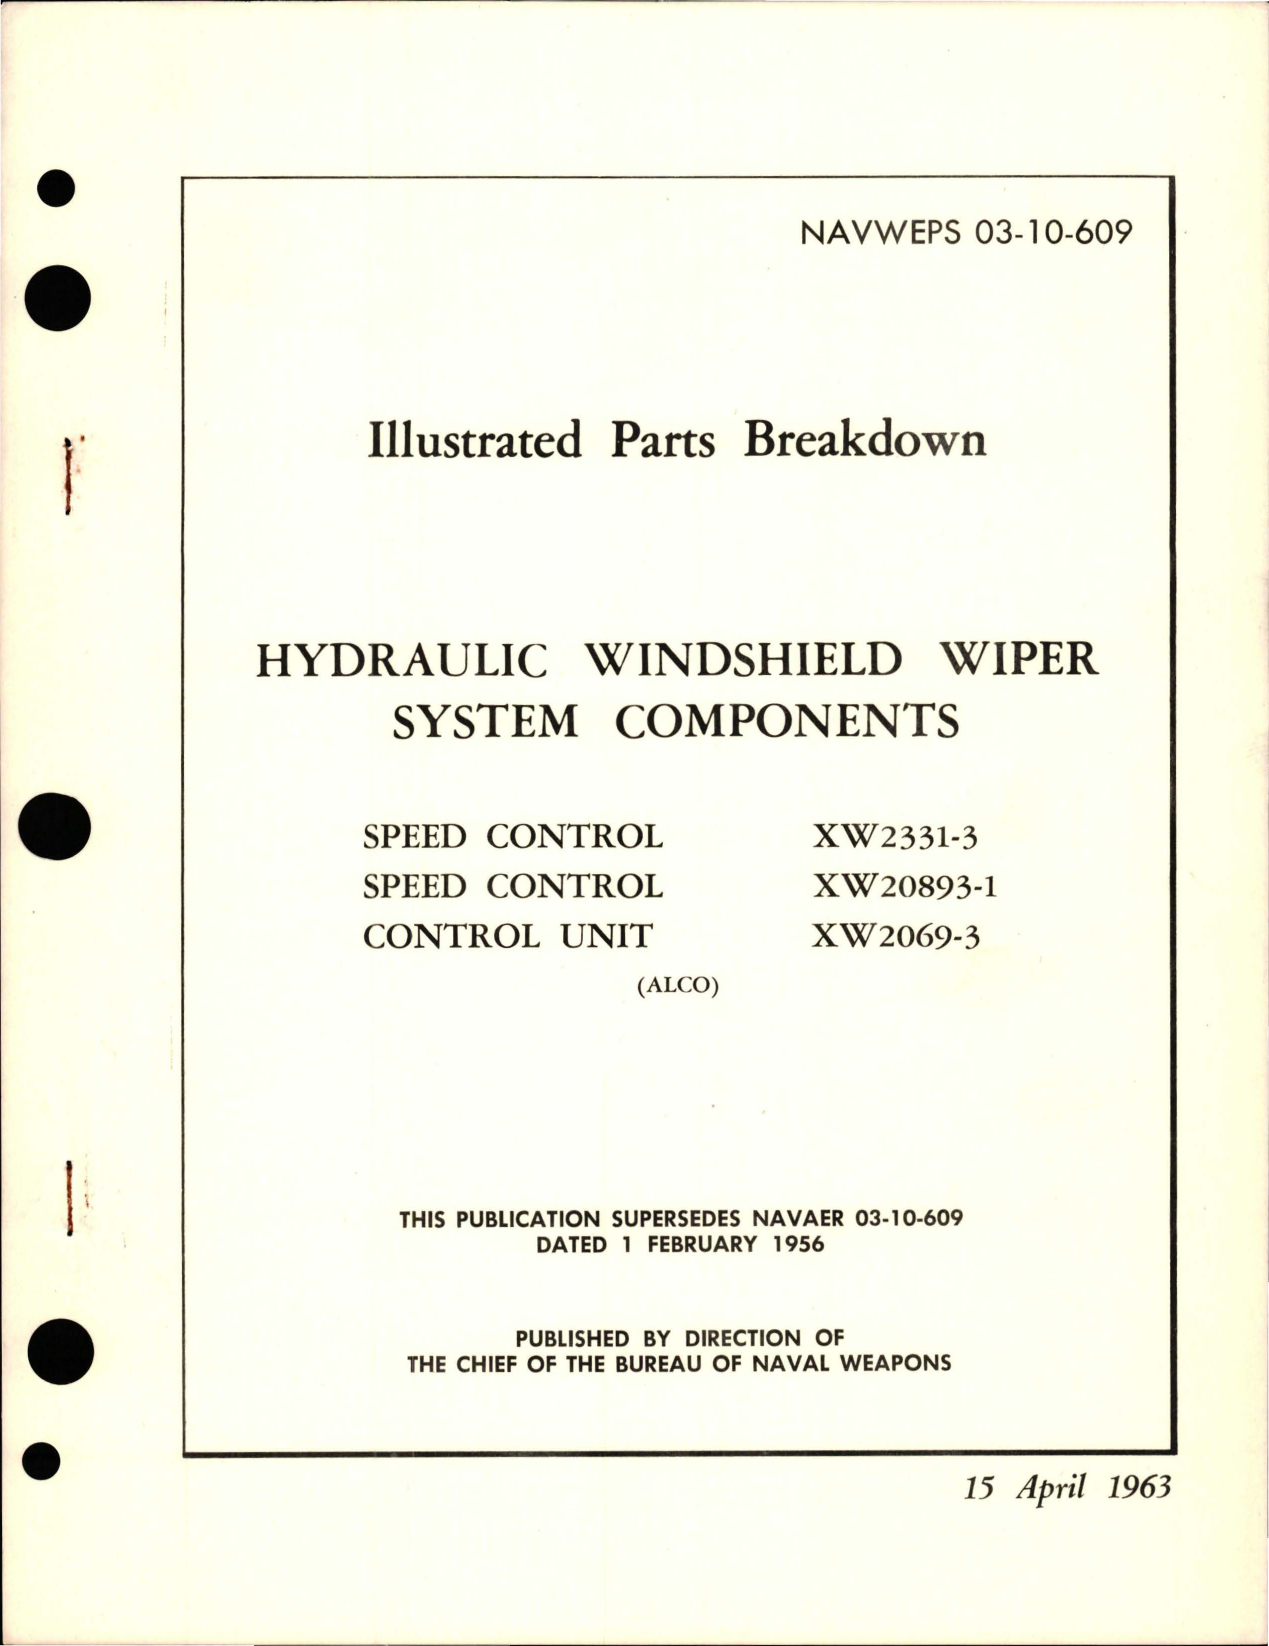 Sample page 1 from AirCorps Library document: llustrated Parts Breakdown for Hydraulic Windshield Wiper System Components - Speed Control XW2331-3 and 20893-1 - Control Unit XW2069-3 